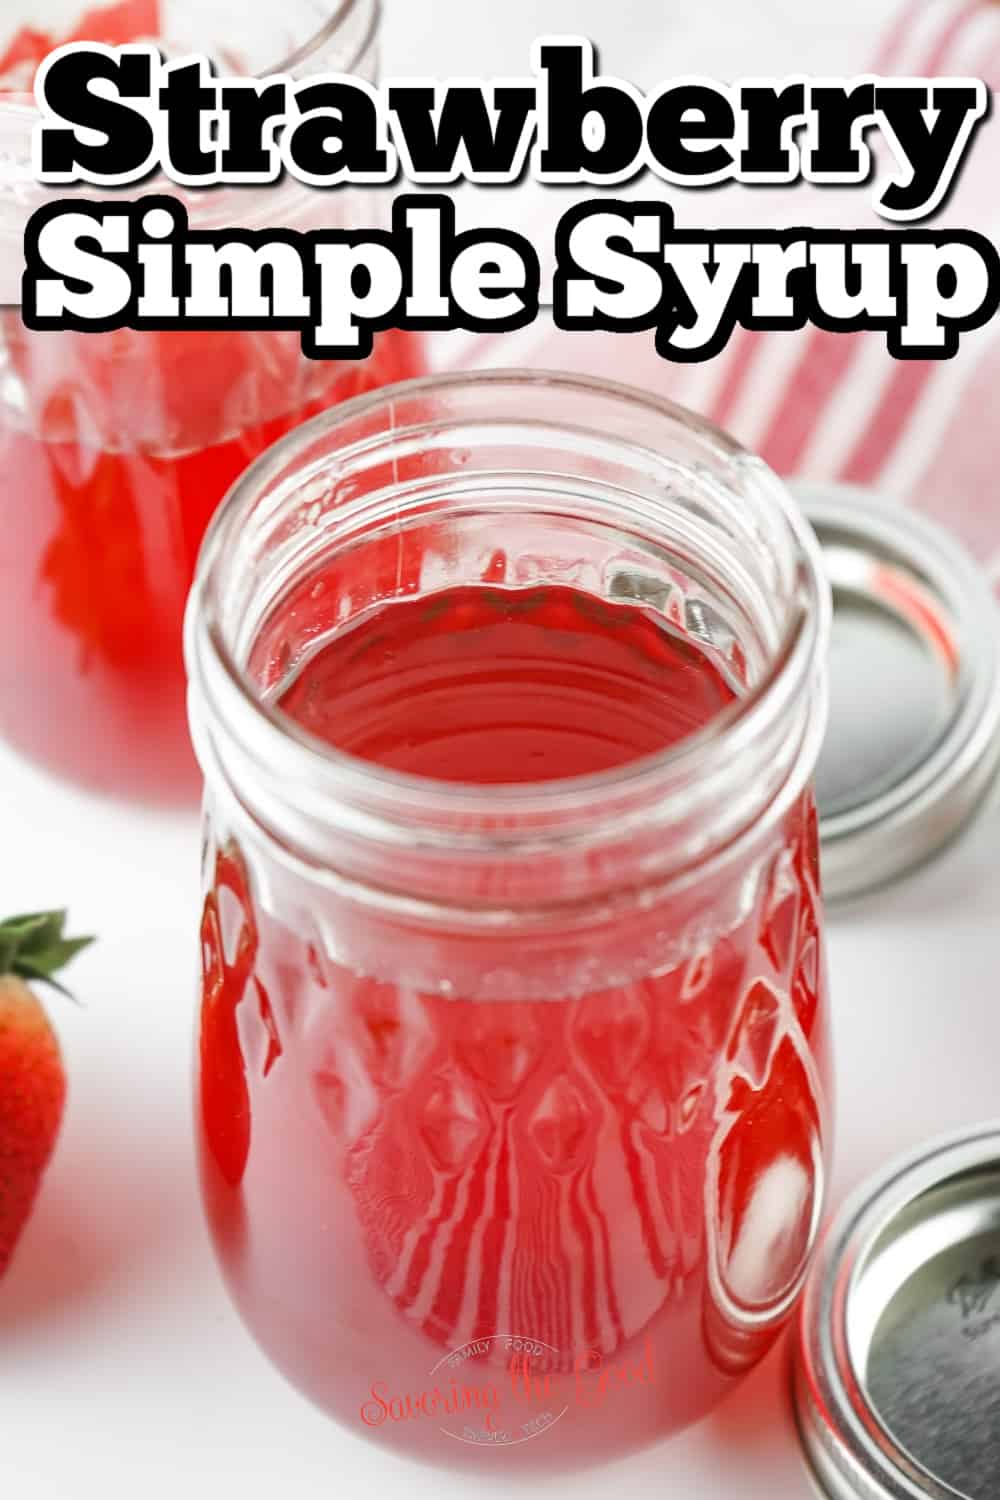 Strawberry simple syrup in jars.